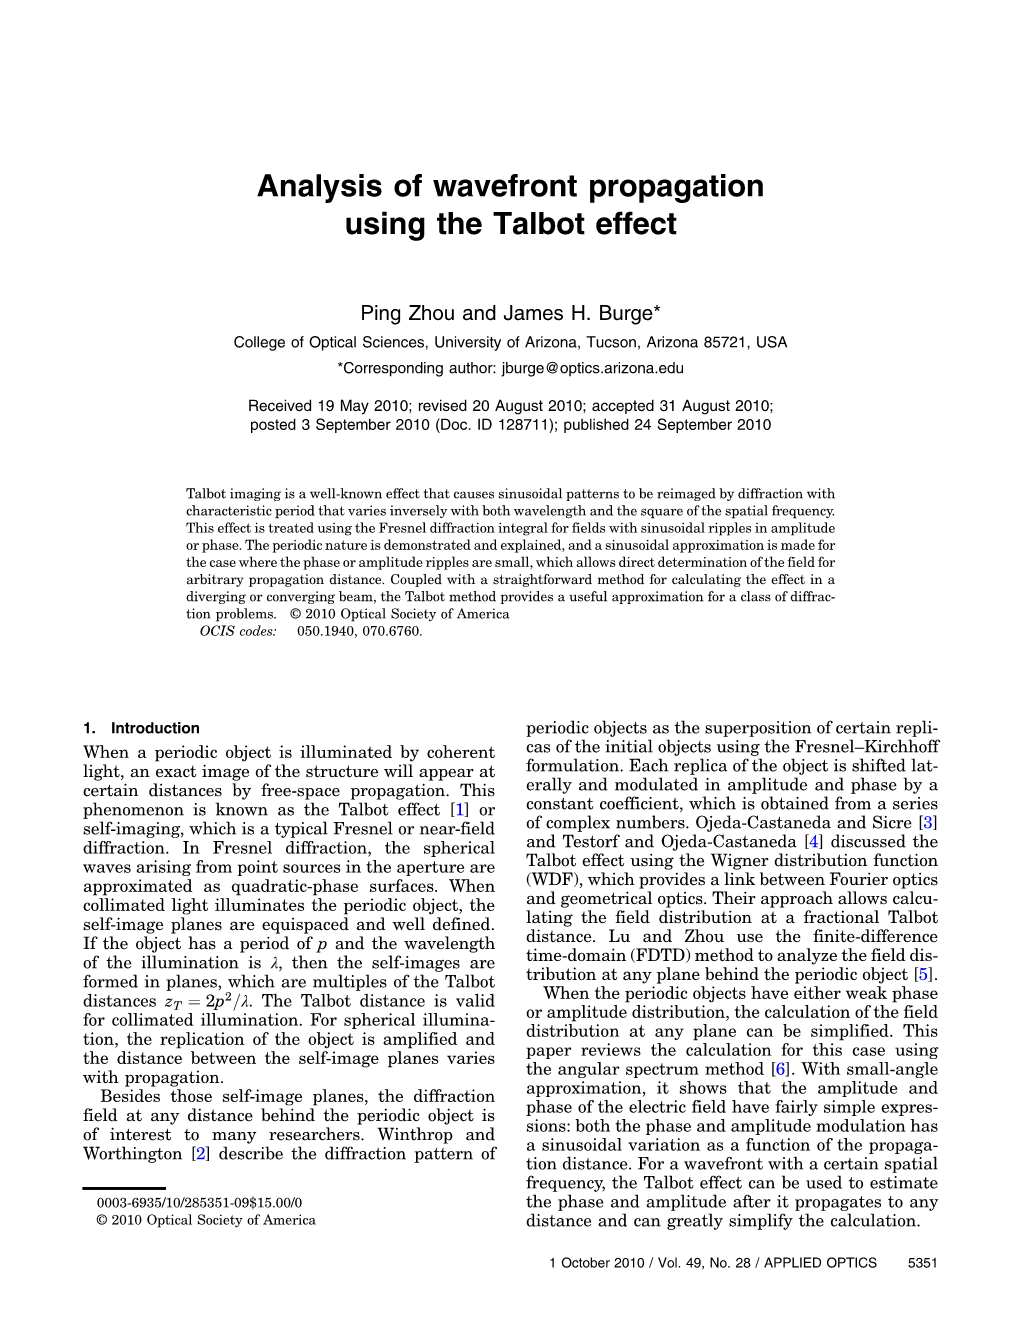 Analysis of Wavefront Propagation Using the Talbot Effect